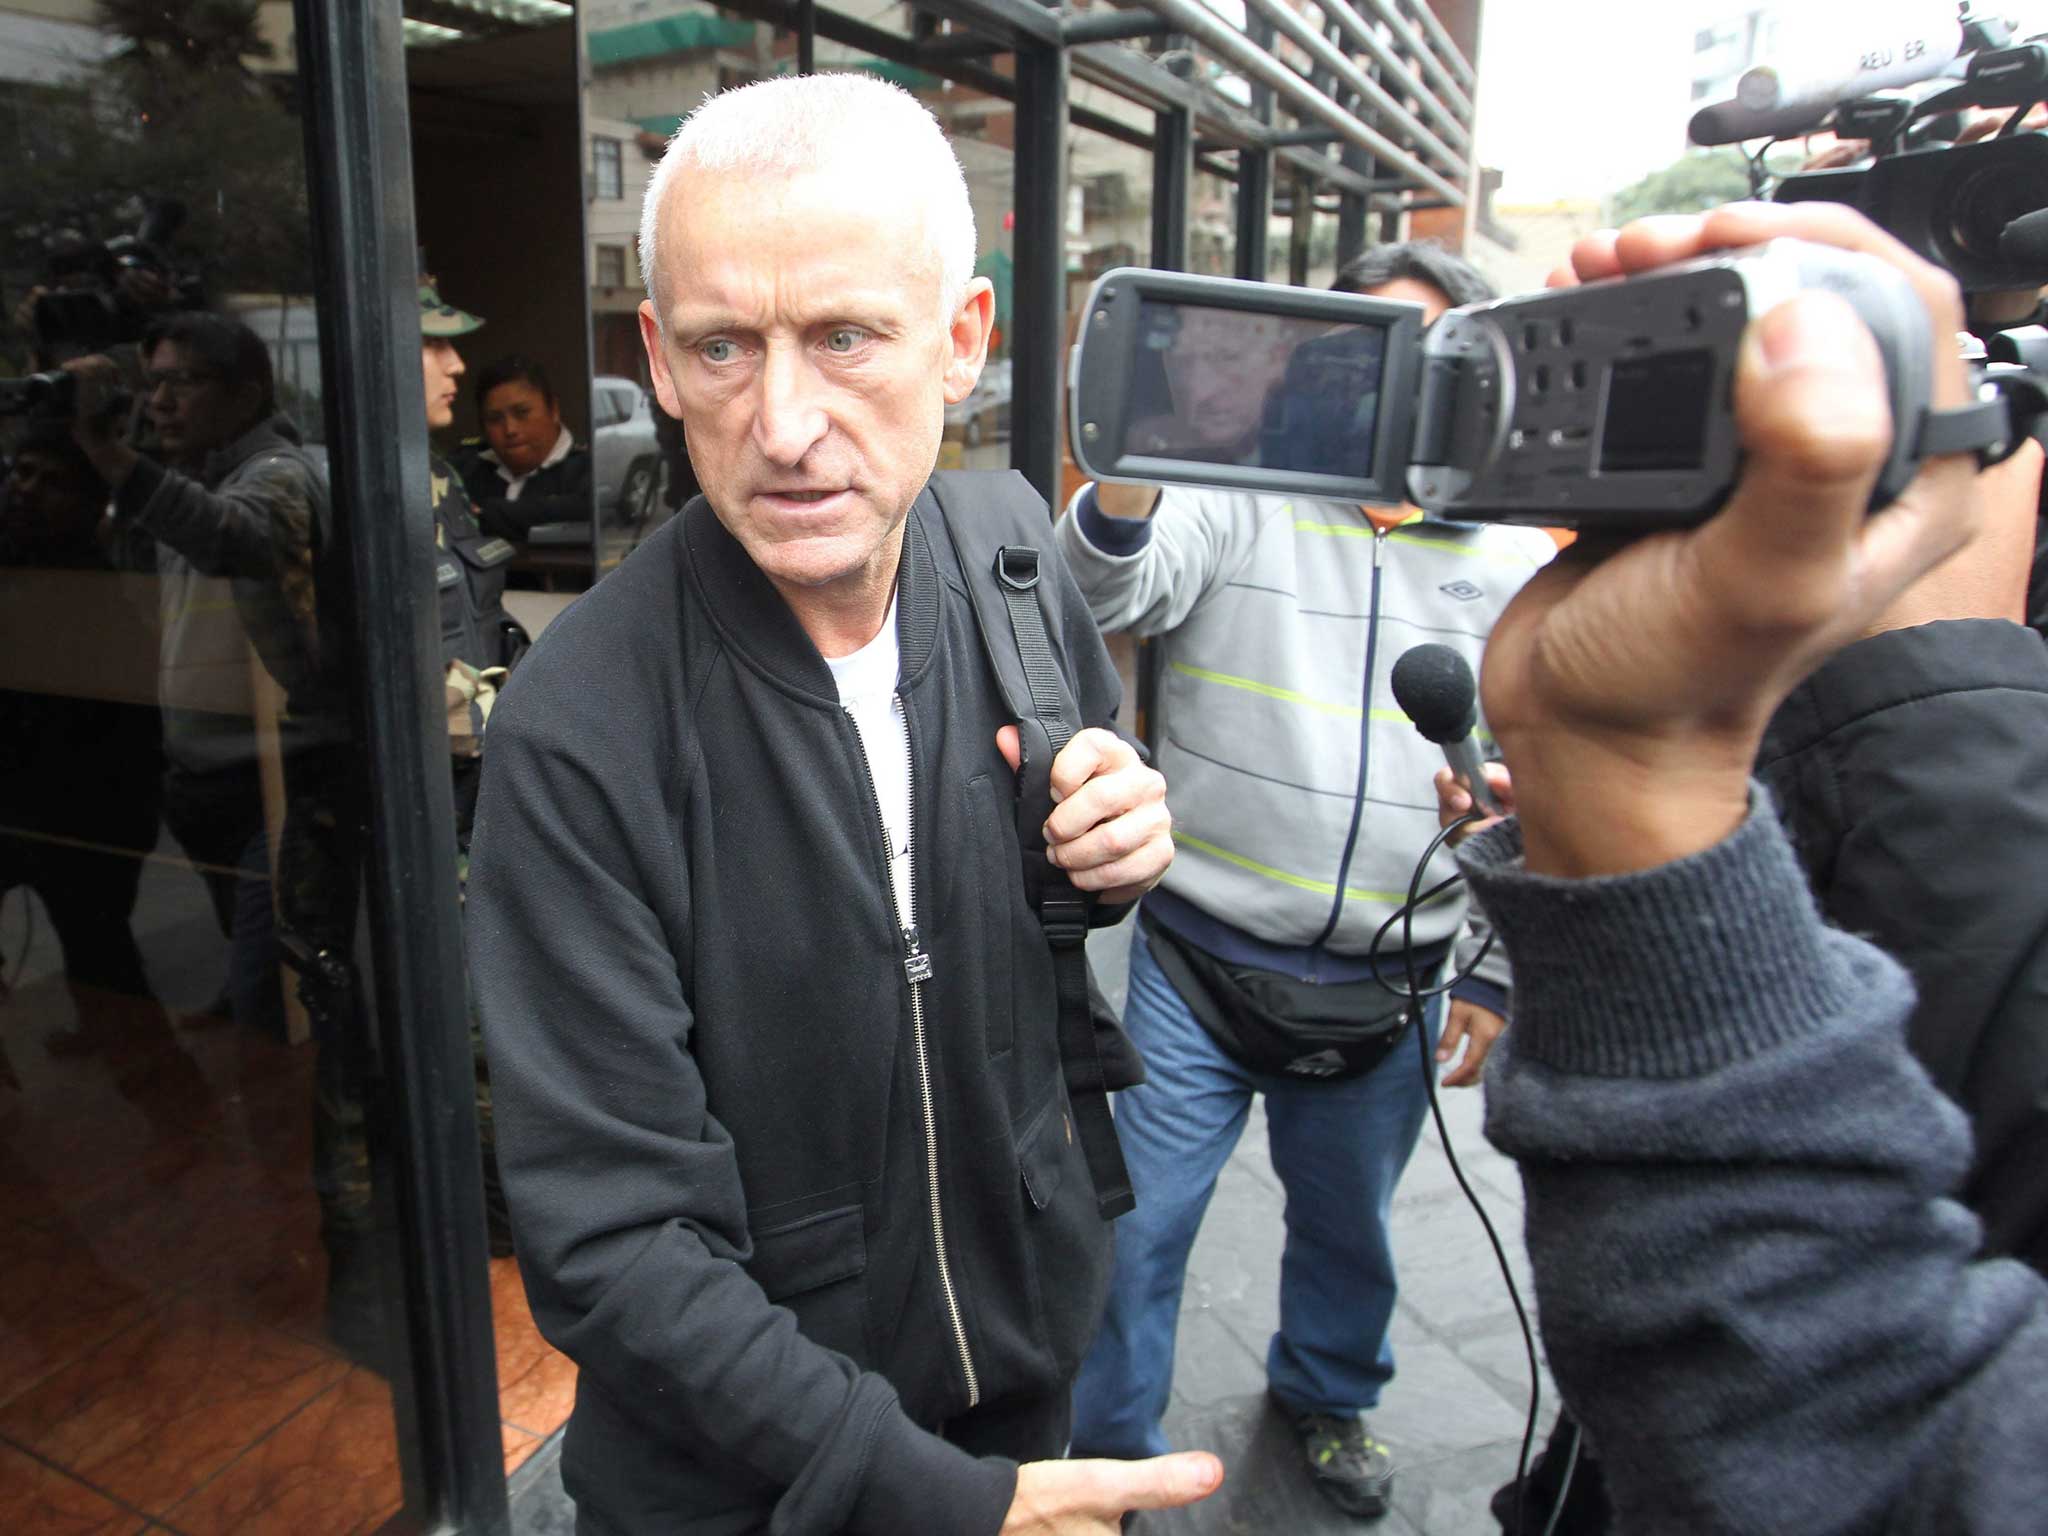 William Reid leaves the police station in Lima